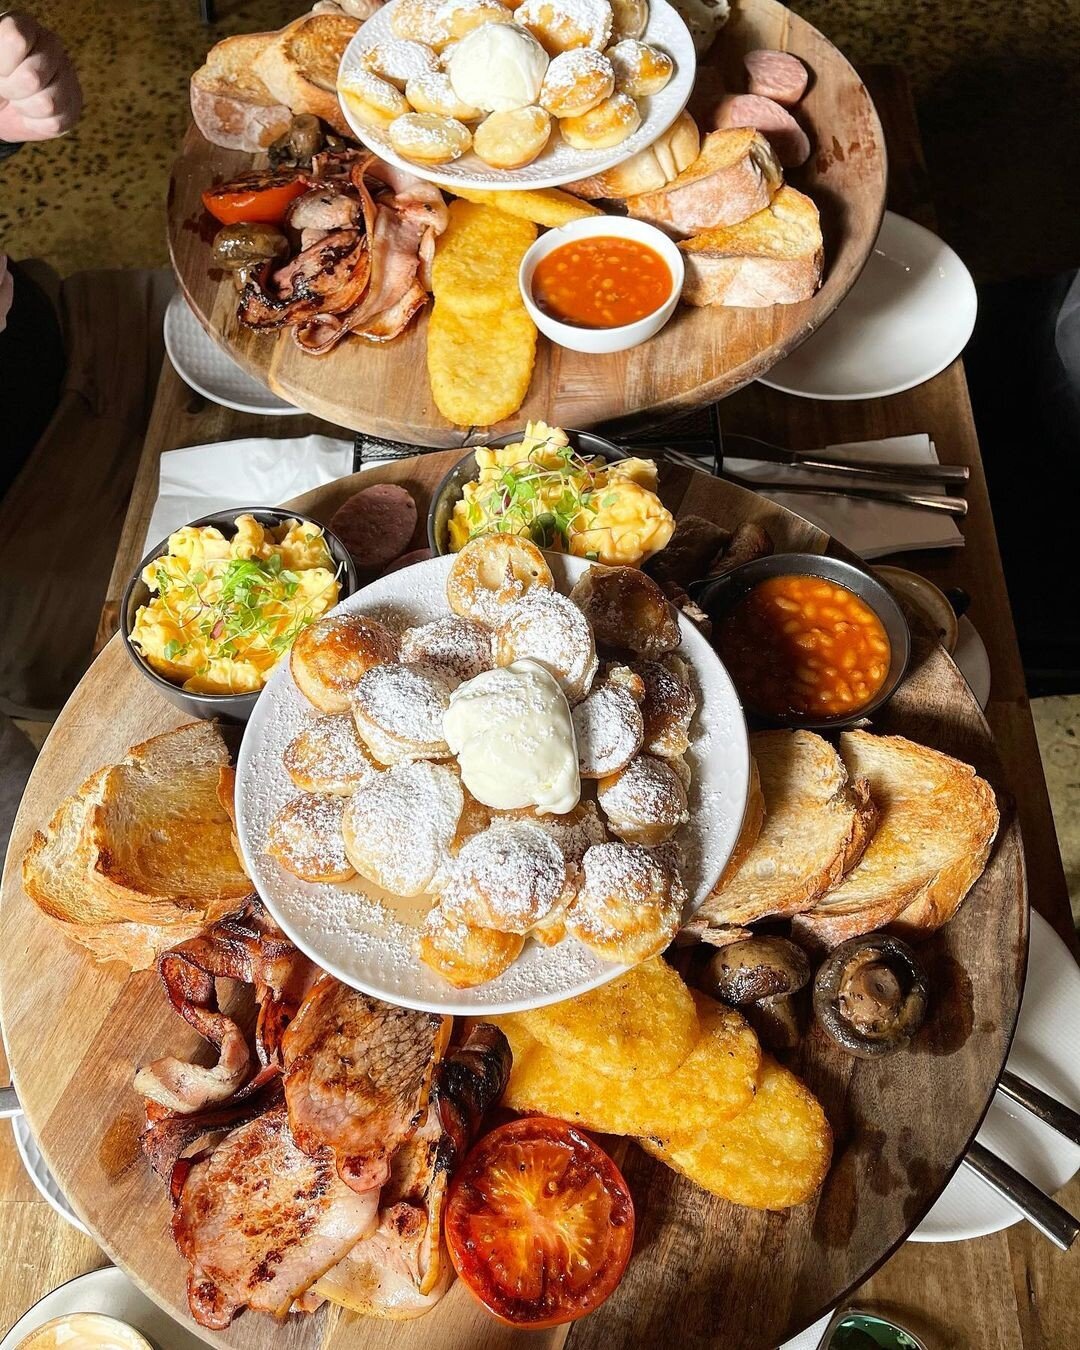 😍 Two platters are better than one!
Repost: @kentjuanresquir 
The perfect brunch I reckon 😝 @thevillagedoorgeelong
#thevillagedoorgeelong #thevillagedoor #geelong #cafegeelong #platter